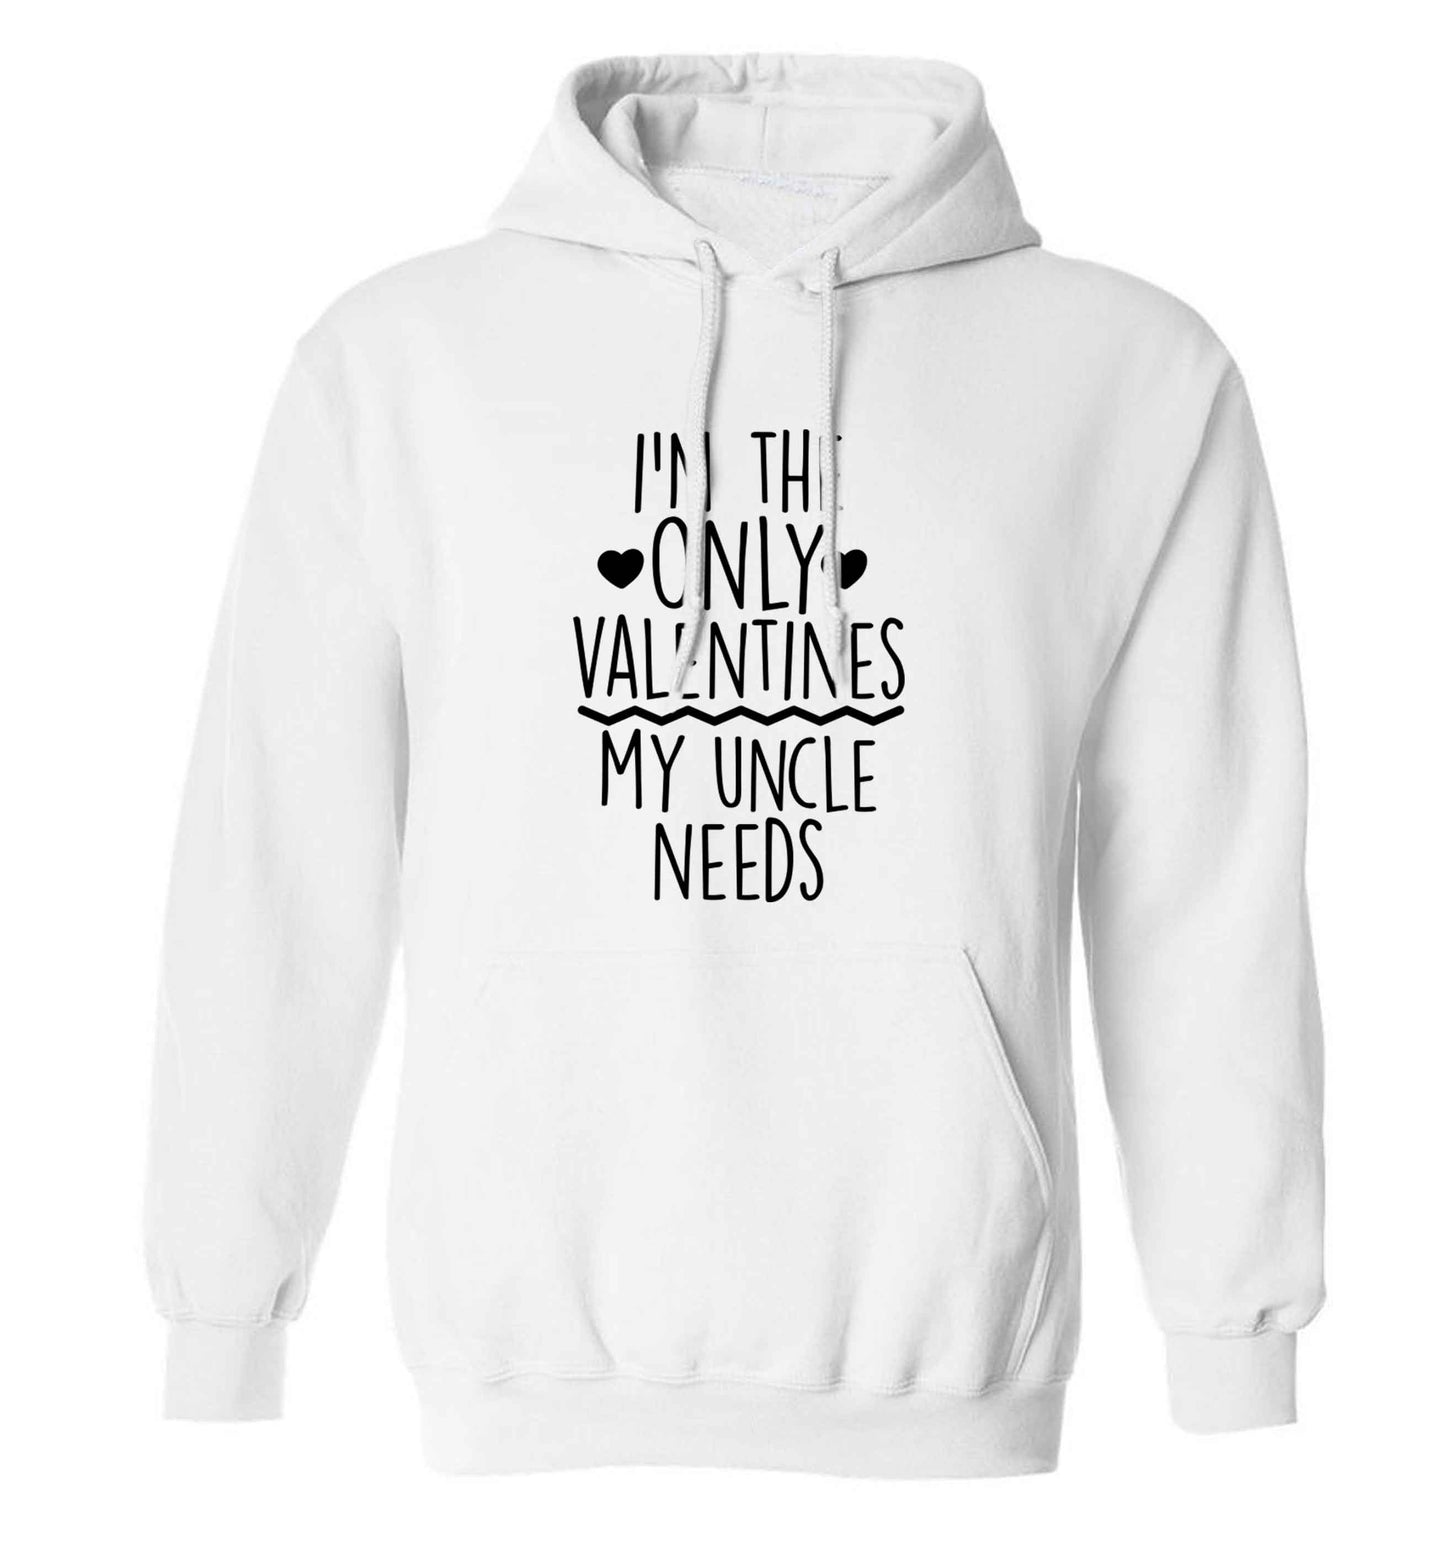 I'm the only valentines my uncle needs adults unisex white hoodie 2XL